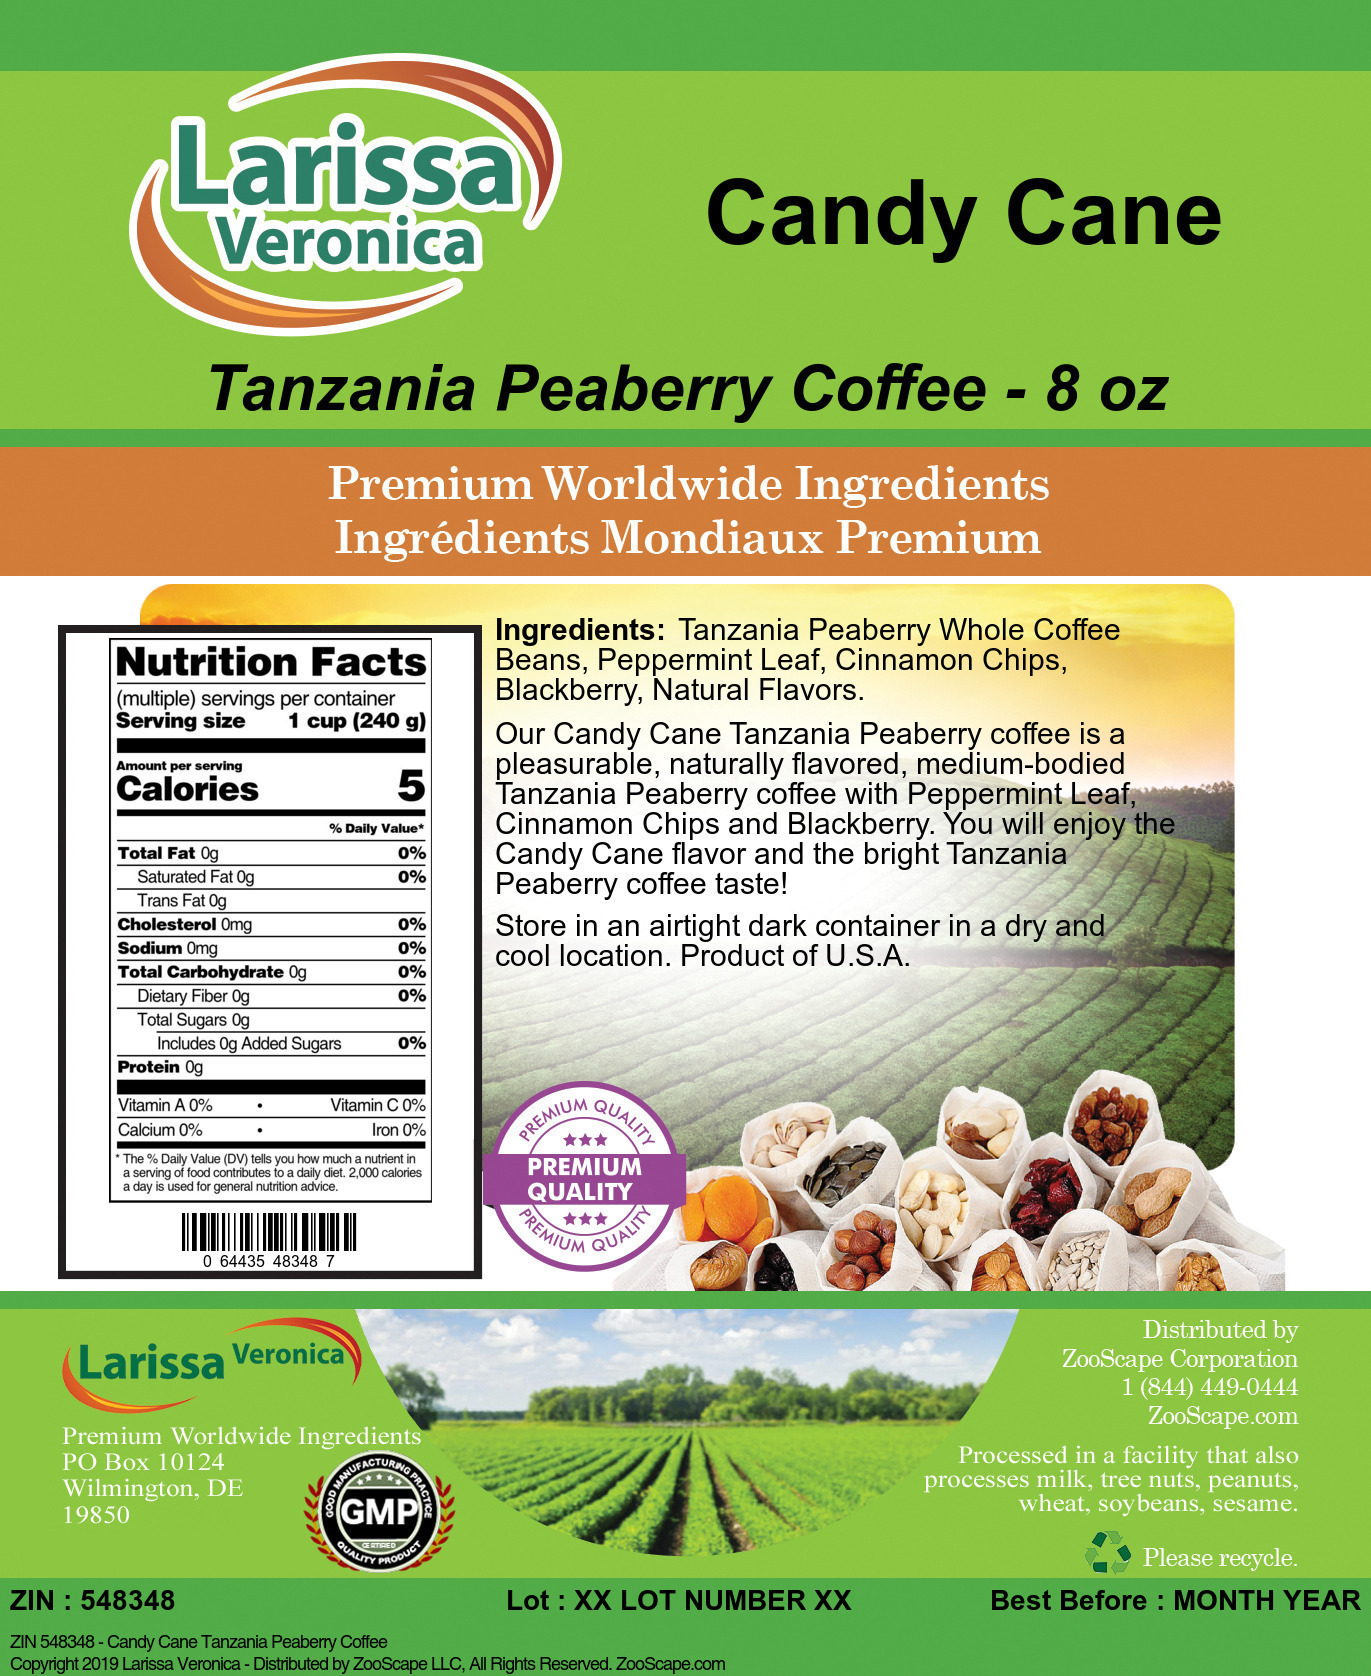 Candy Cane Tanzania Peaberry Coffee - Label